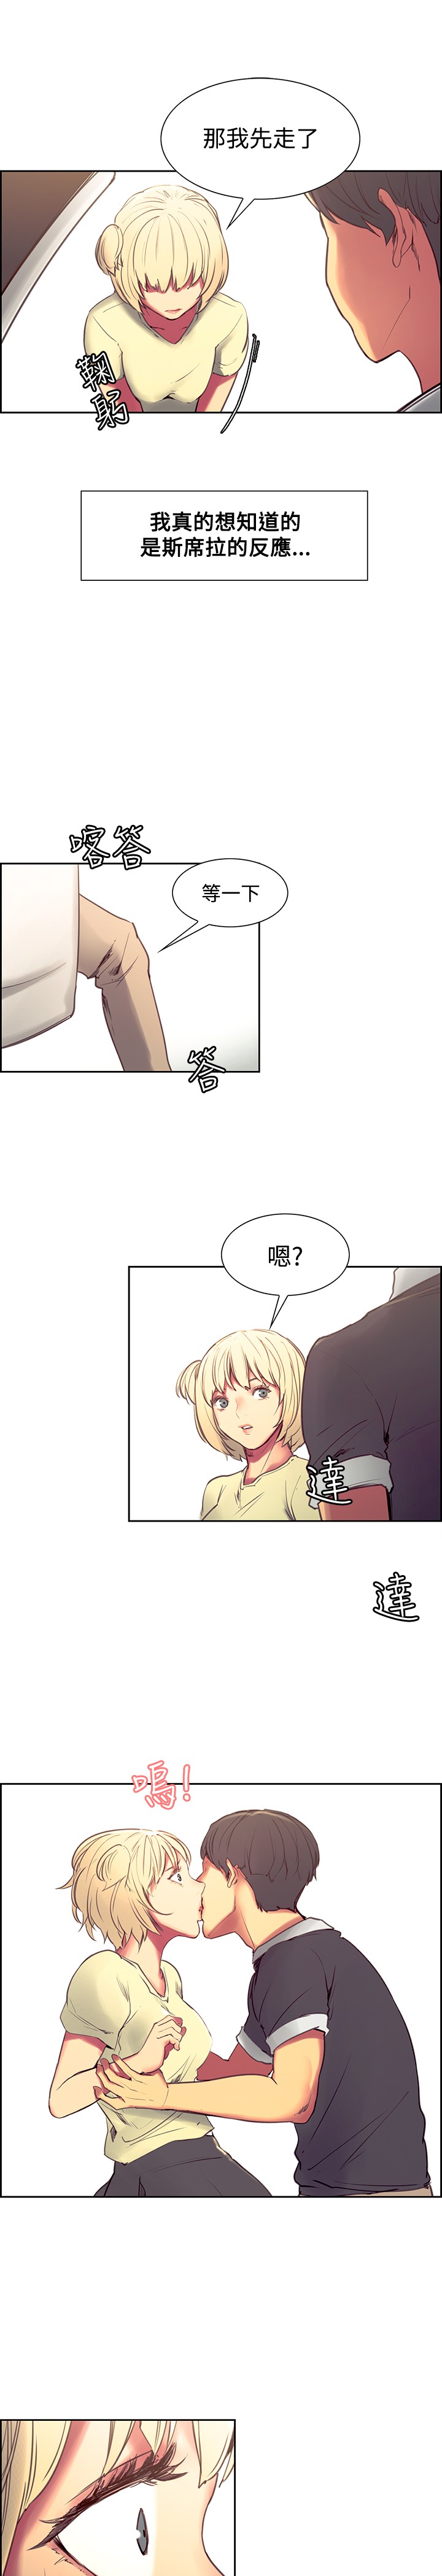 [Serious] Domesticate the Housekeeper 调教家政妇 Ch.29~41 [Chinese]中文 page 33 full